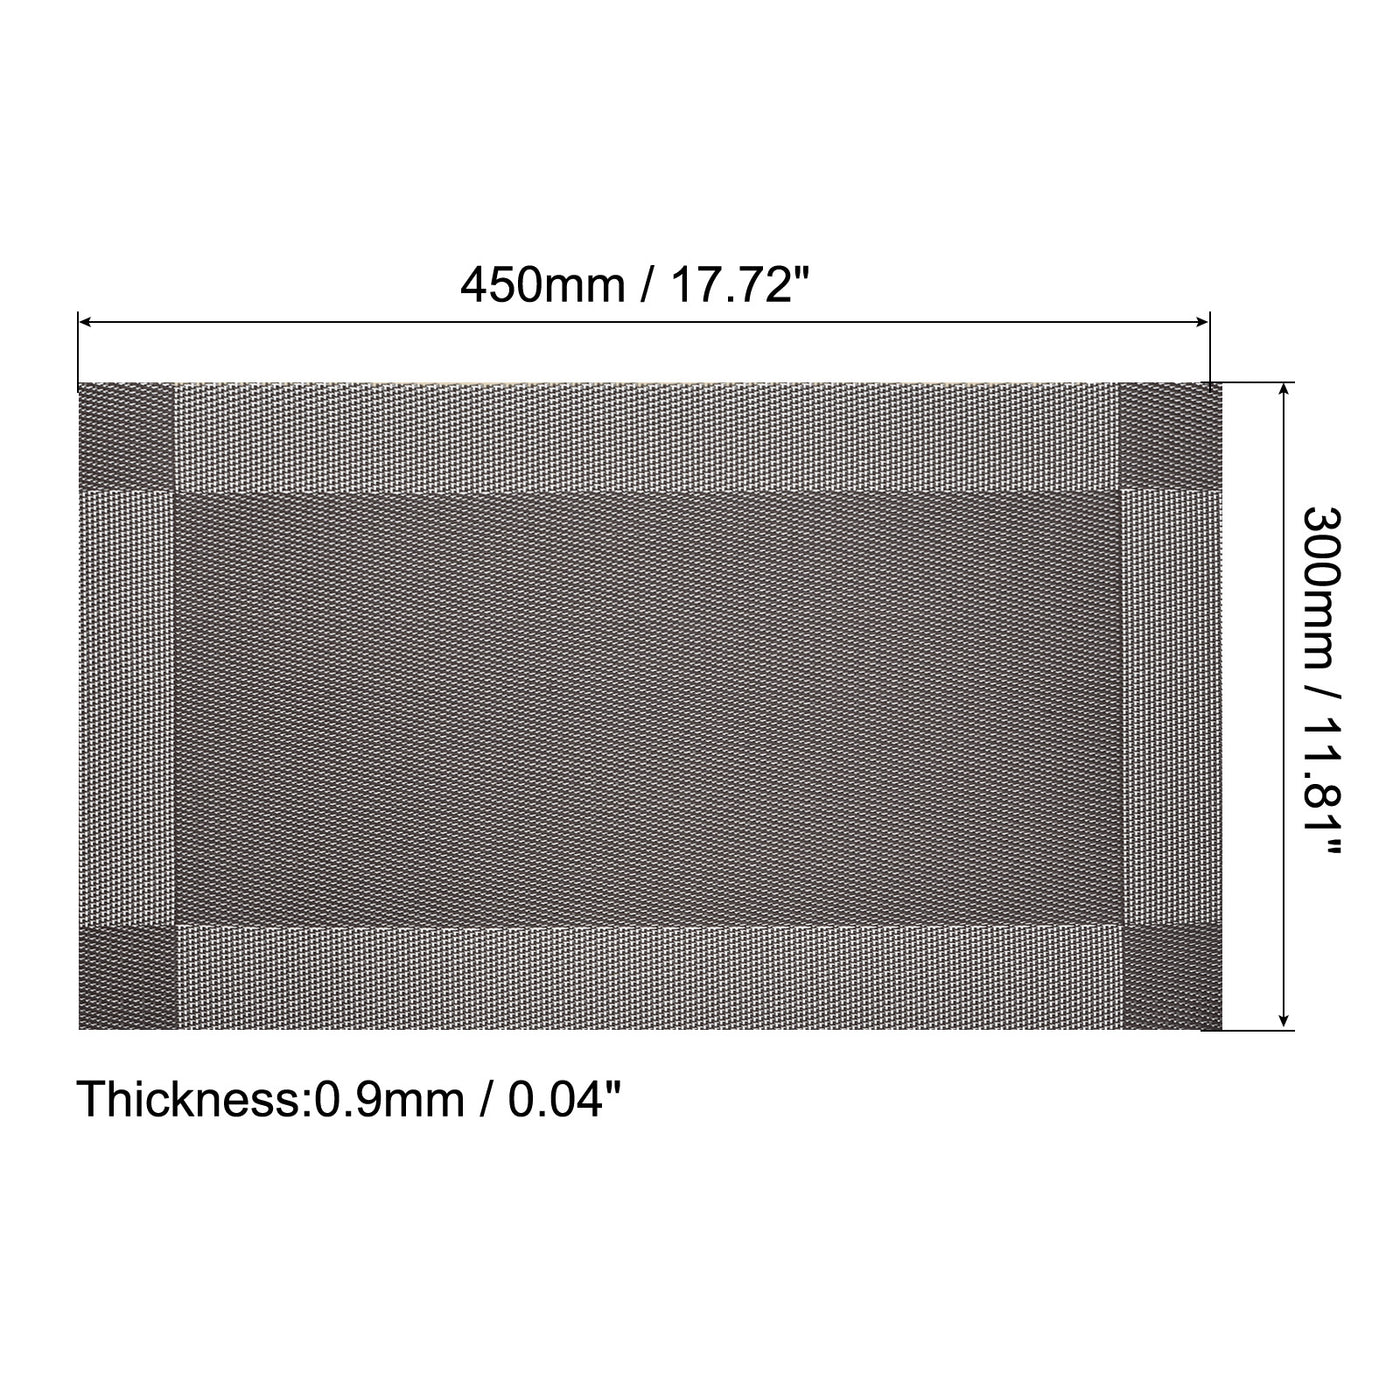 uxcell Uxcell Place Mats 450x300mm 2pcs PVC Table Washable Woven Placemat, Dark Coffee